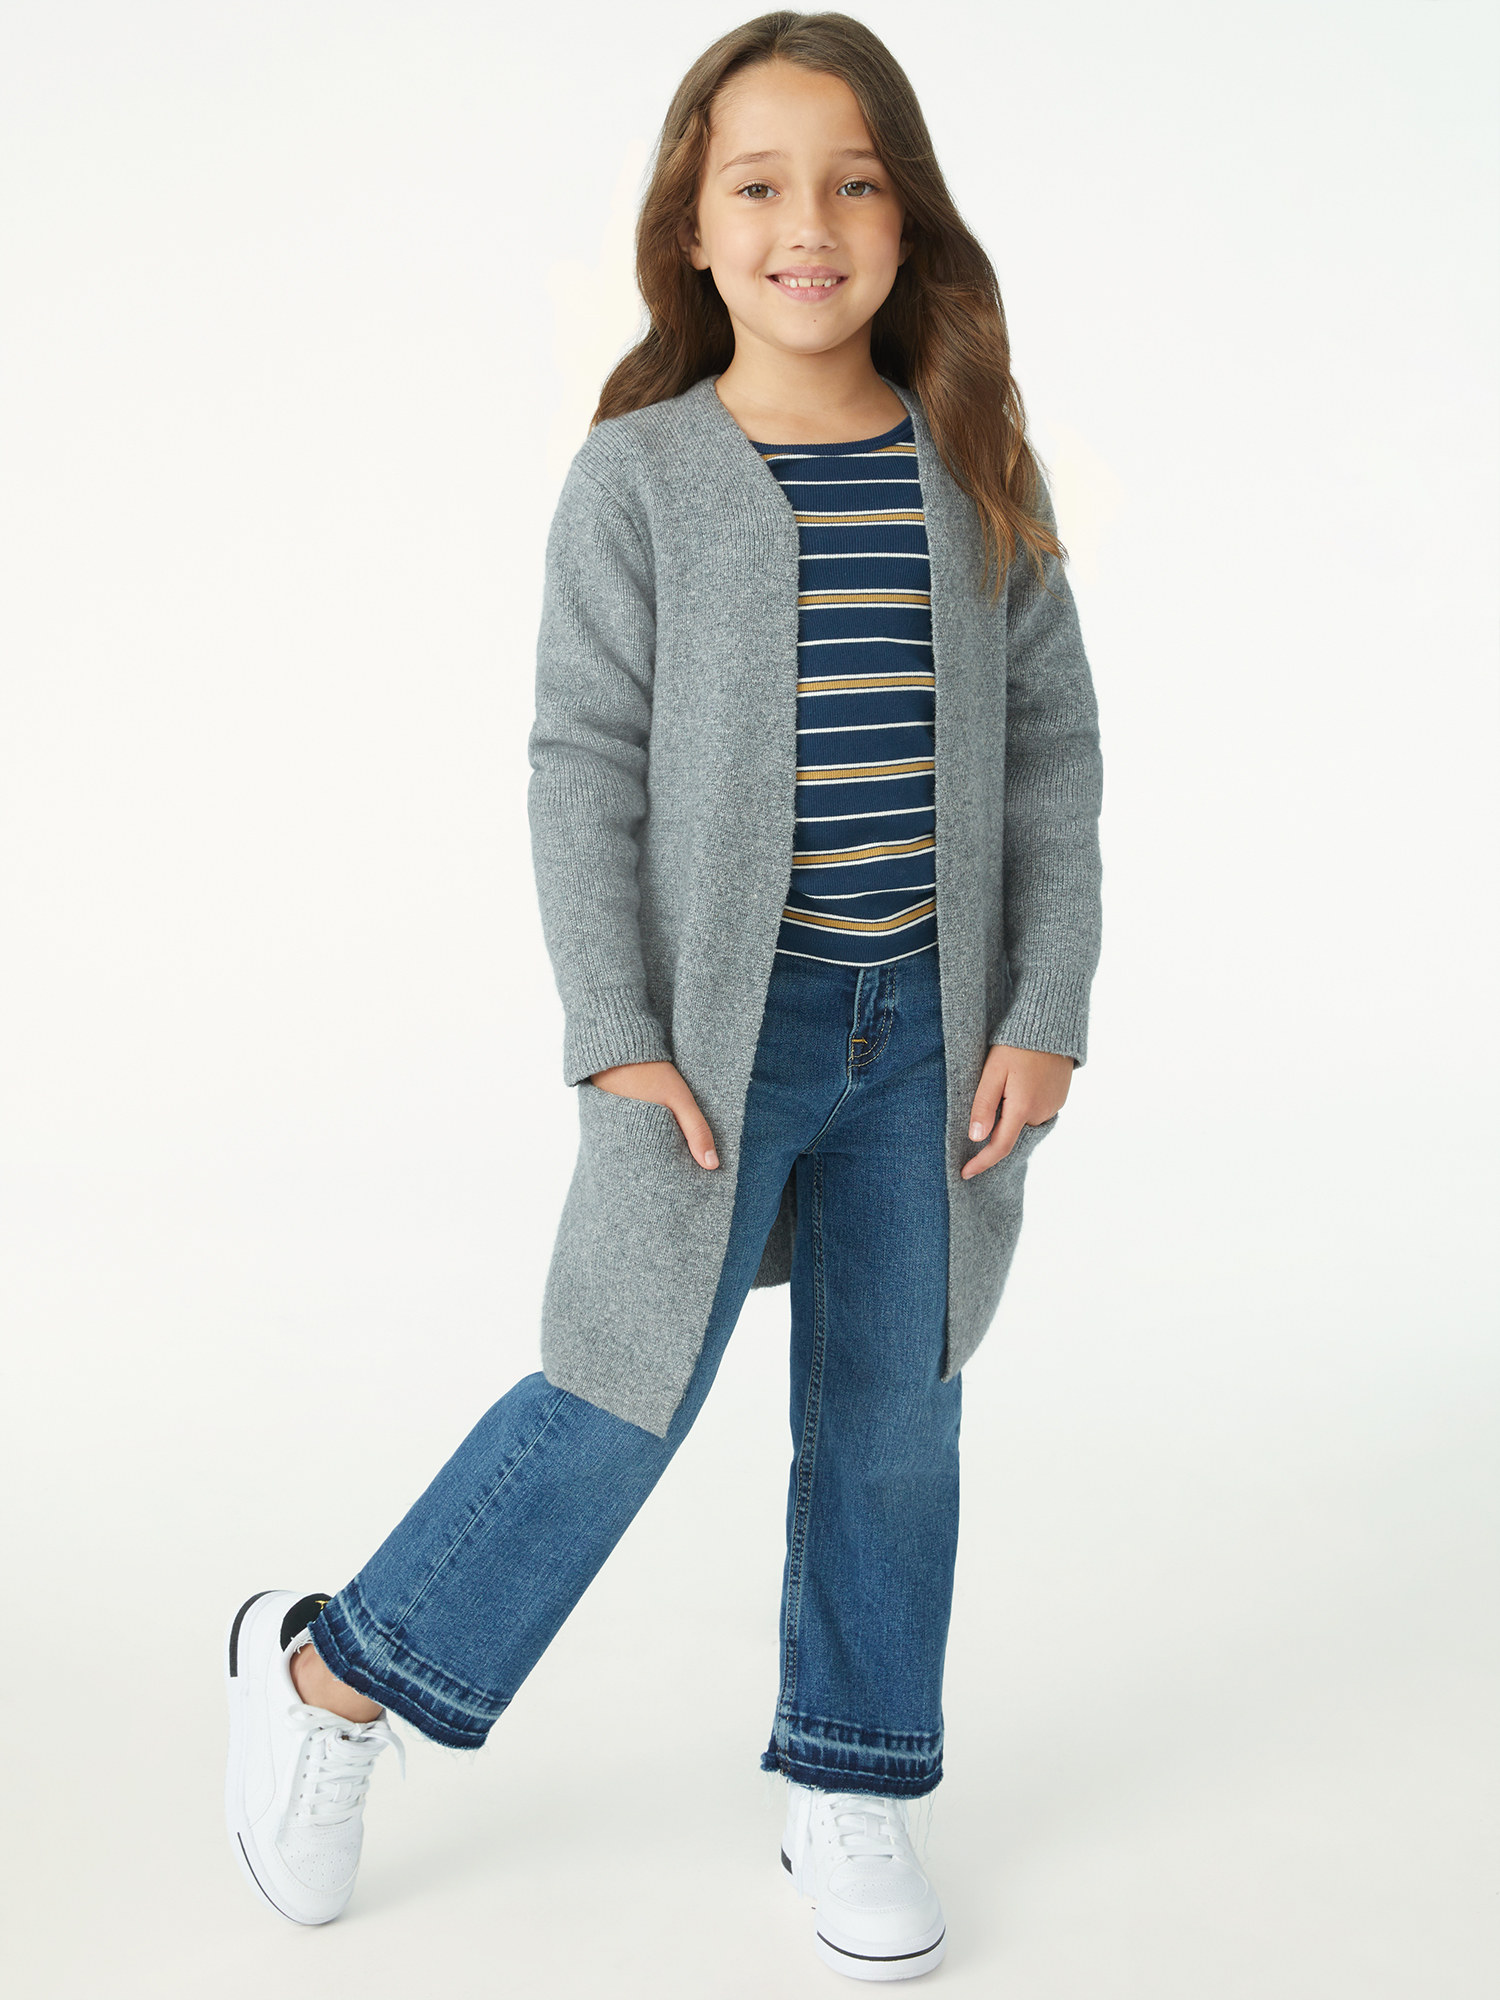 Free Assembly Girls Long Open Cardigan Sweater, Sizes 4-18 - image 1 of 4